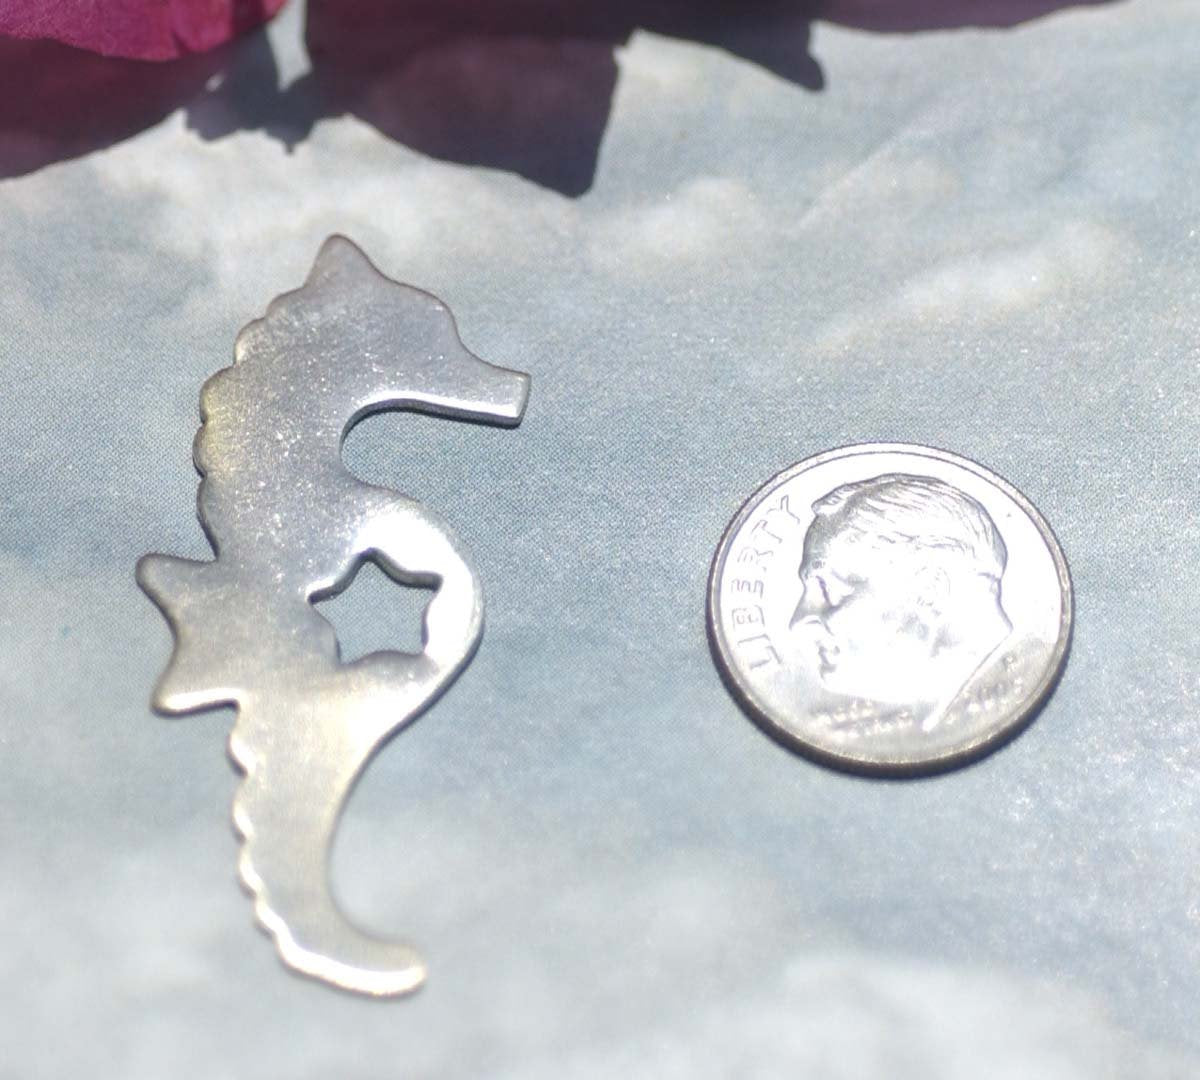 Nickel Silver Seahorse with Star Blanks Cutout Shape Charms for Stamping Texturing 100% Nickel Silver Blank